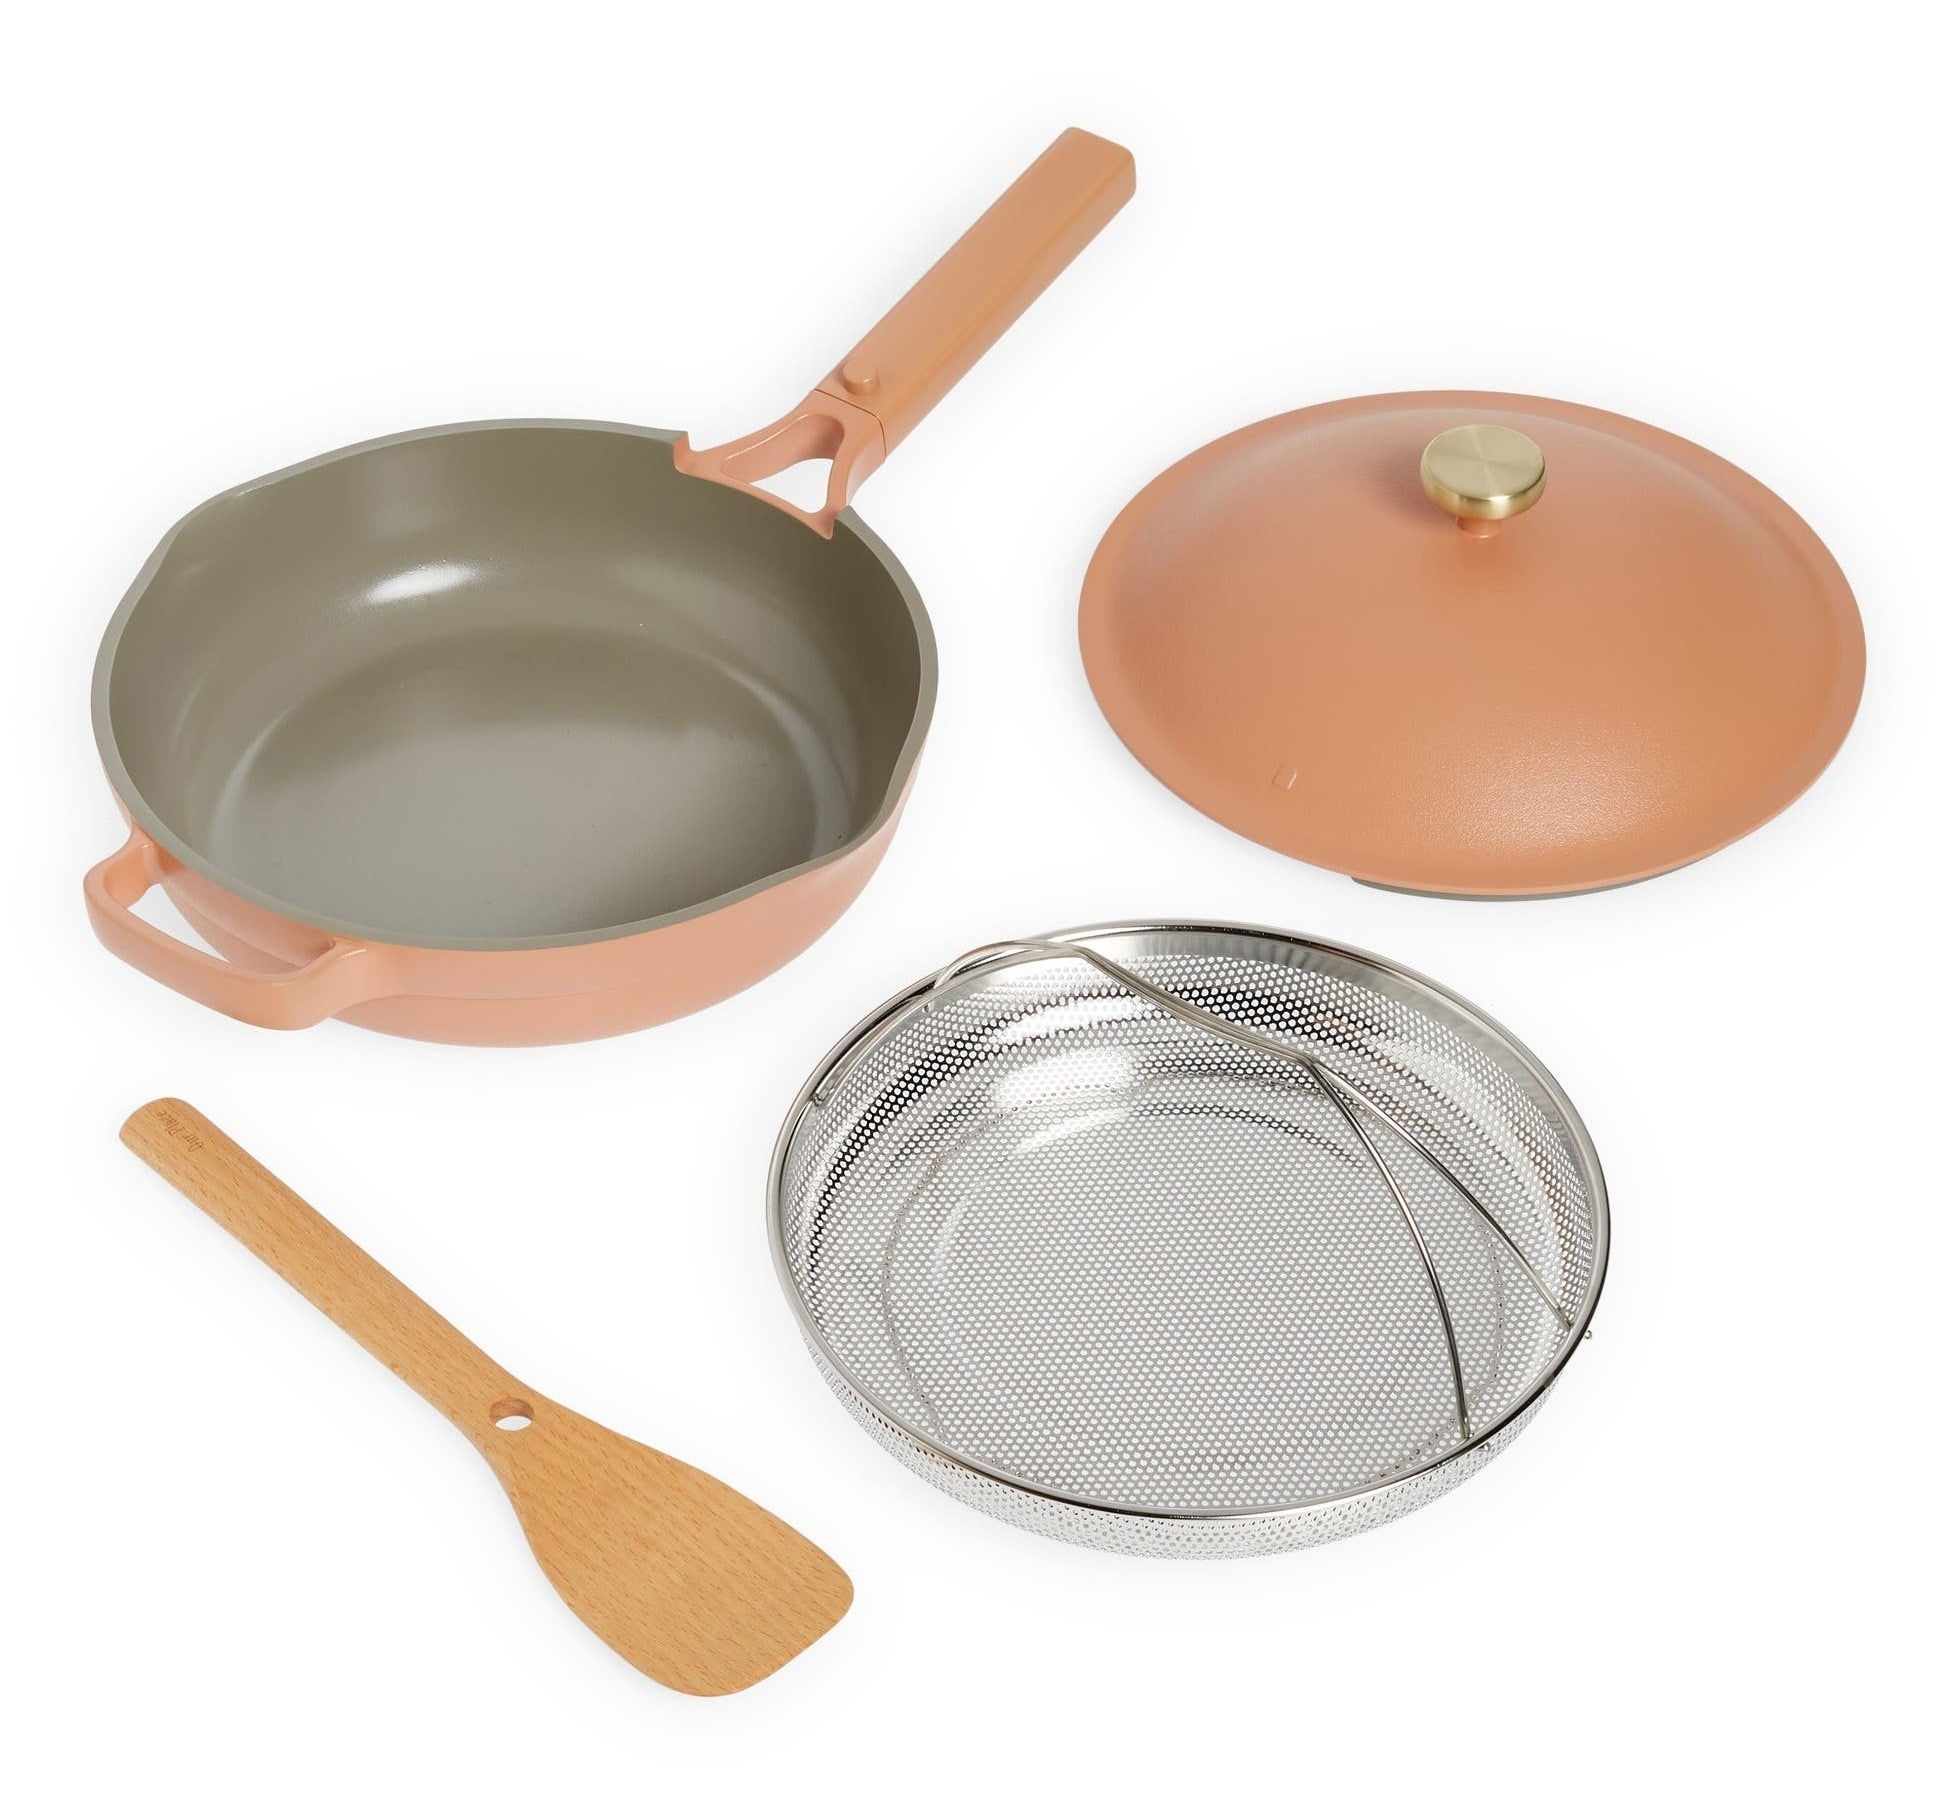 Peach pan with spatula, lid, and steamer basket.